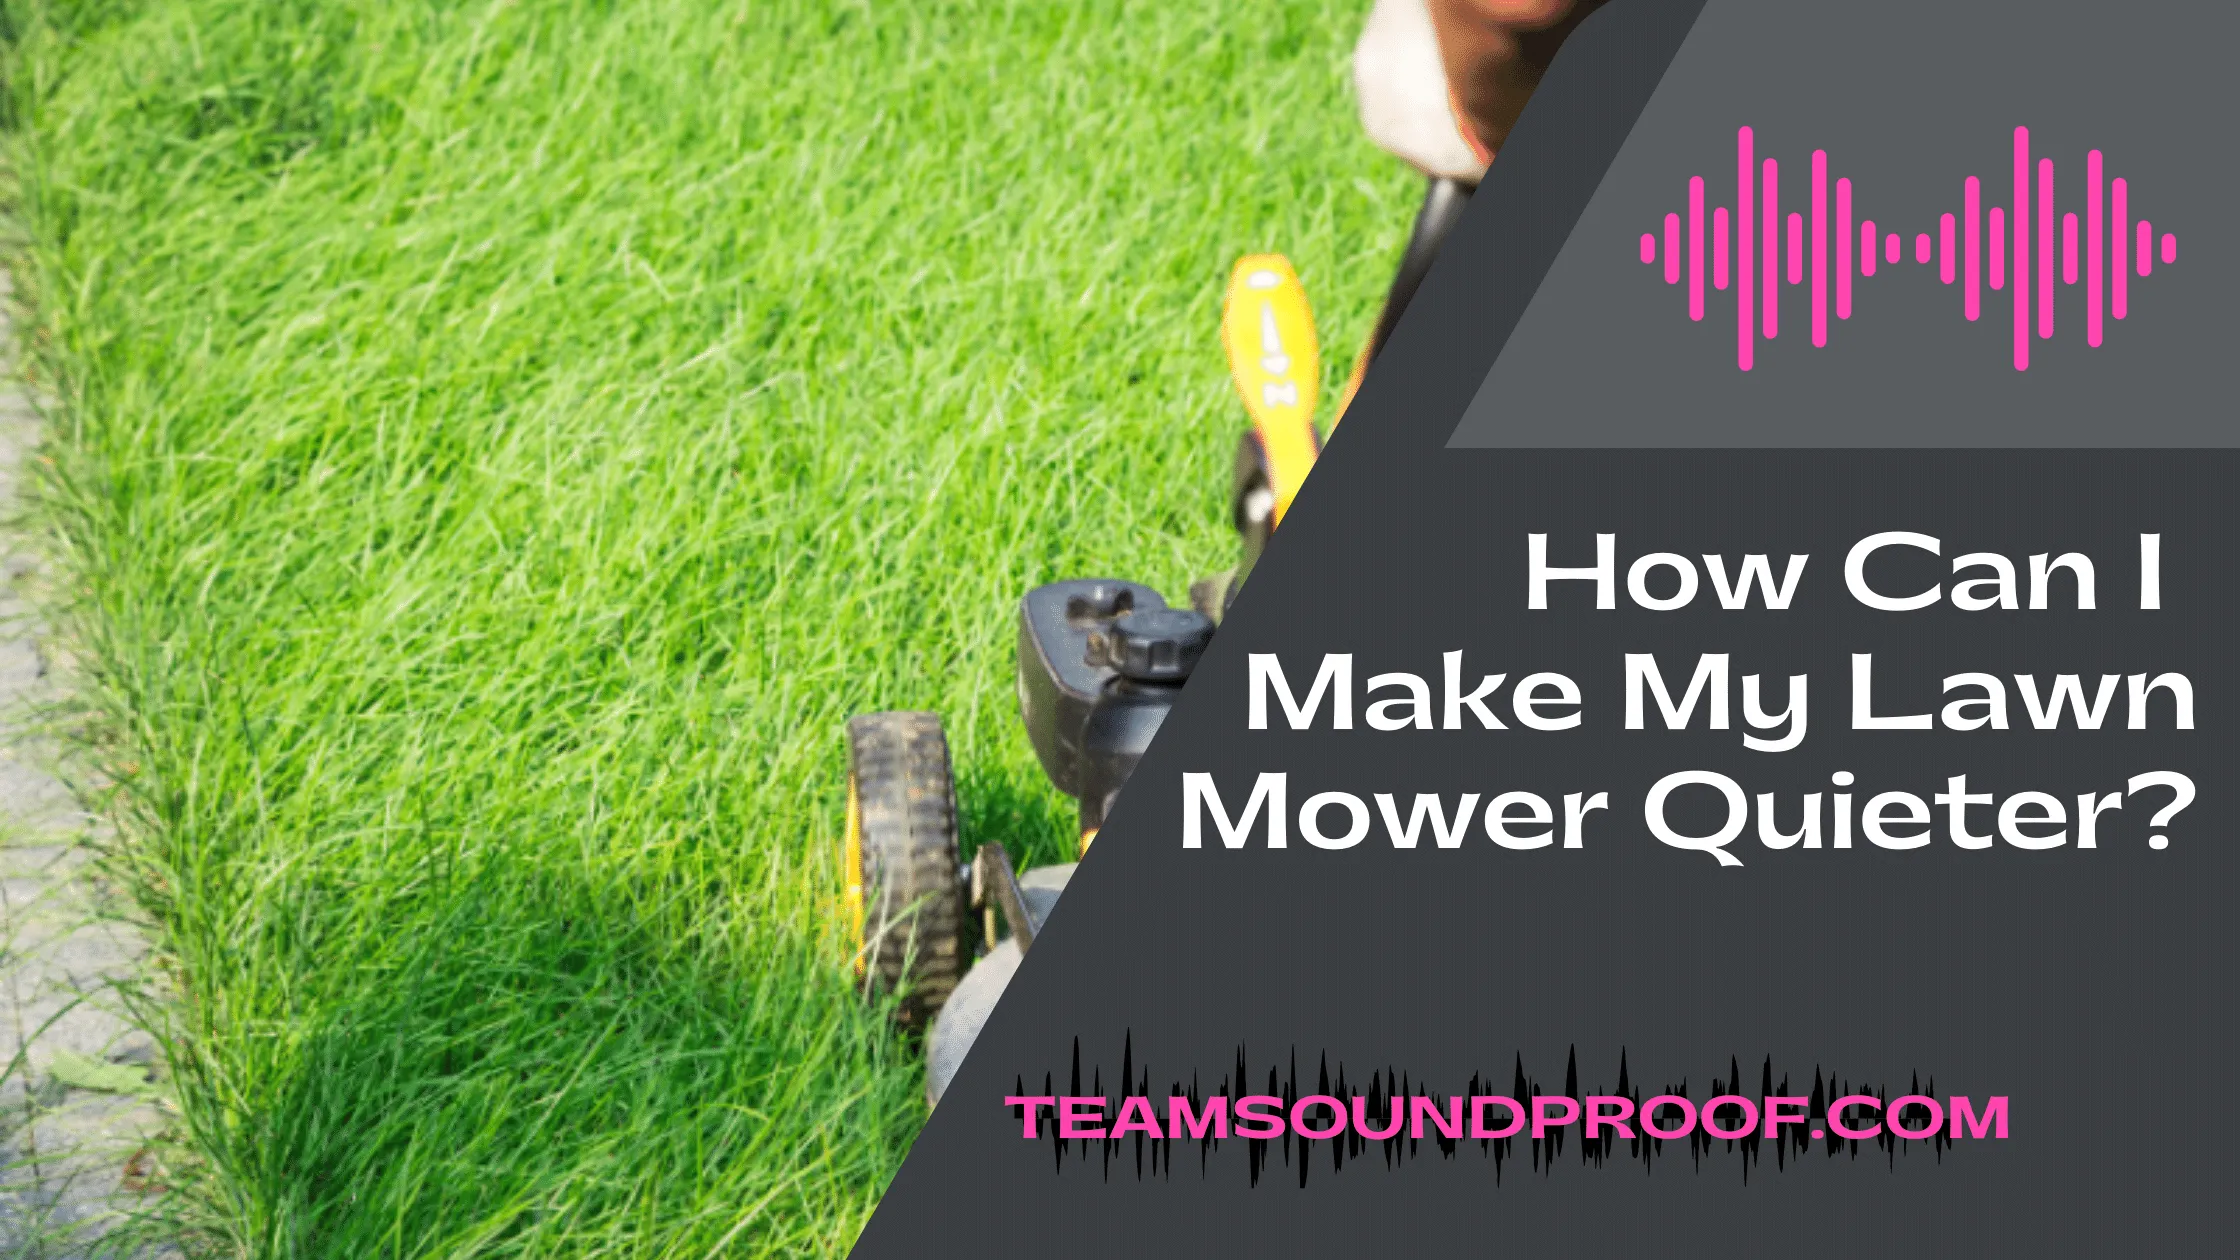 How Can I Make My Lawn Mower Quieter? - Complete Guide